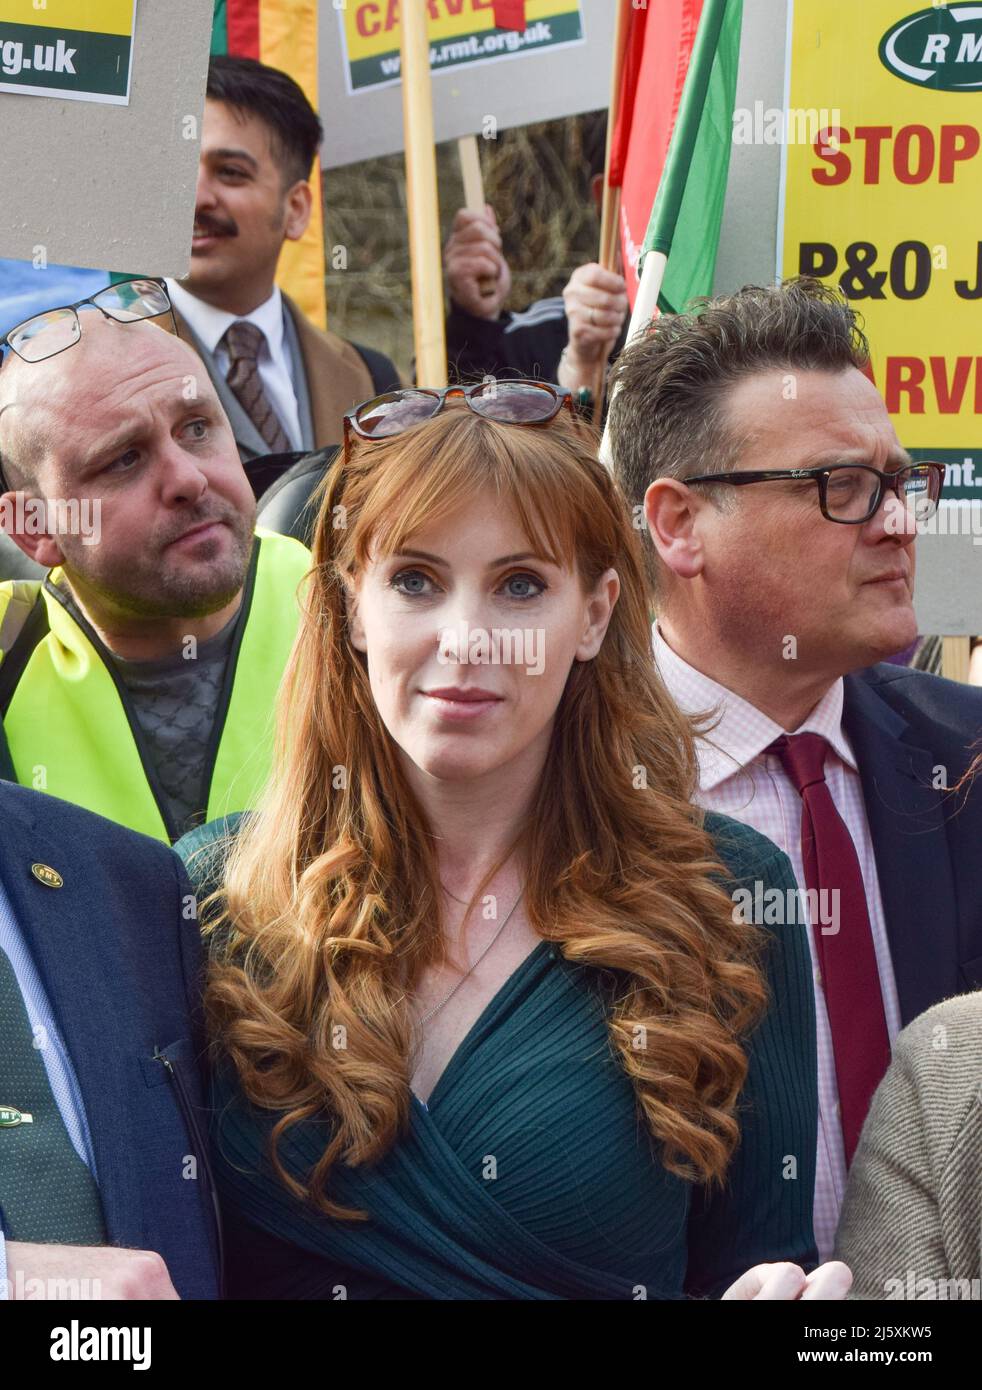 London, UK. 21st March 2022. Labour deputy leader Angela Rayner joins the protesters outside Parliament. P&O Ferries staff and RMT Union members marched from the headquarters of DP World, the company which owns P&O, to Parliament, after 800 UK staff were fired and replaced by agency workers. Stock Photo